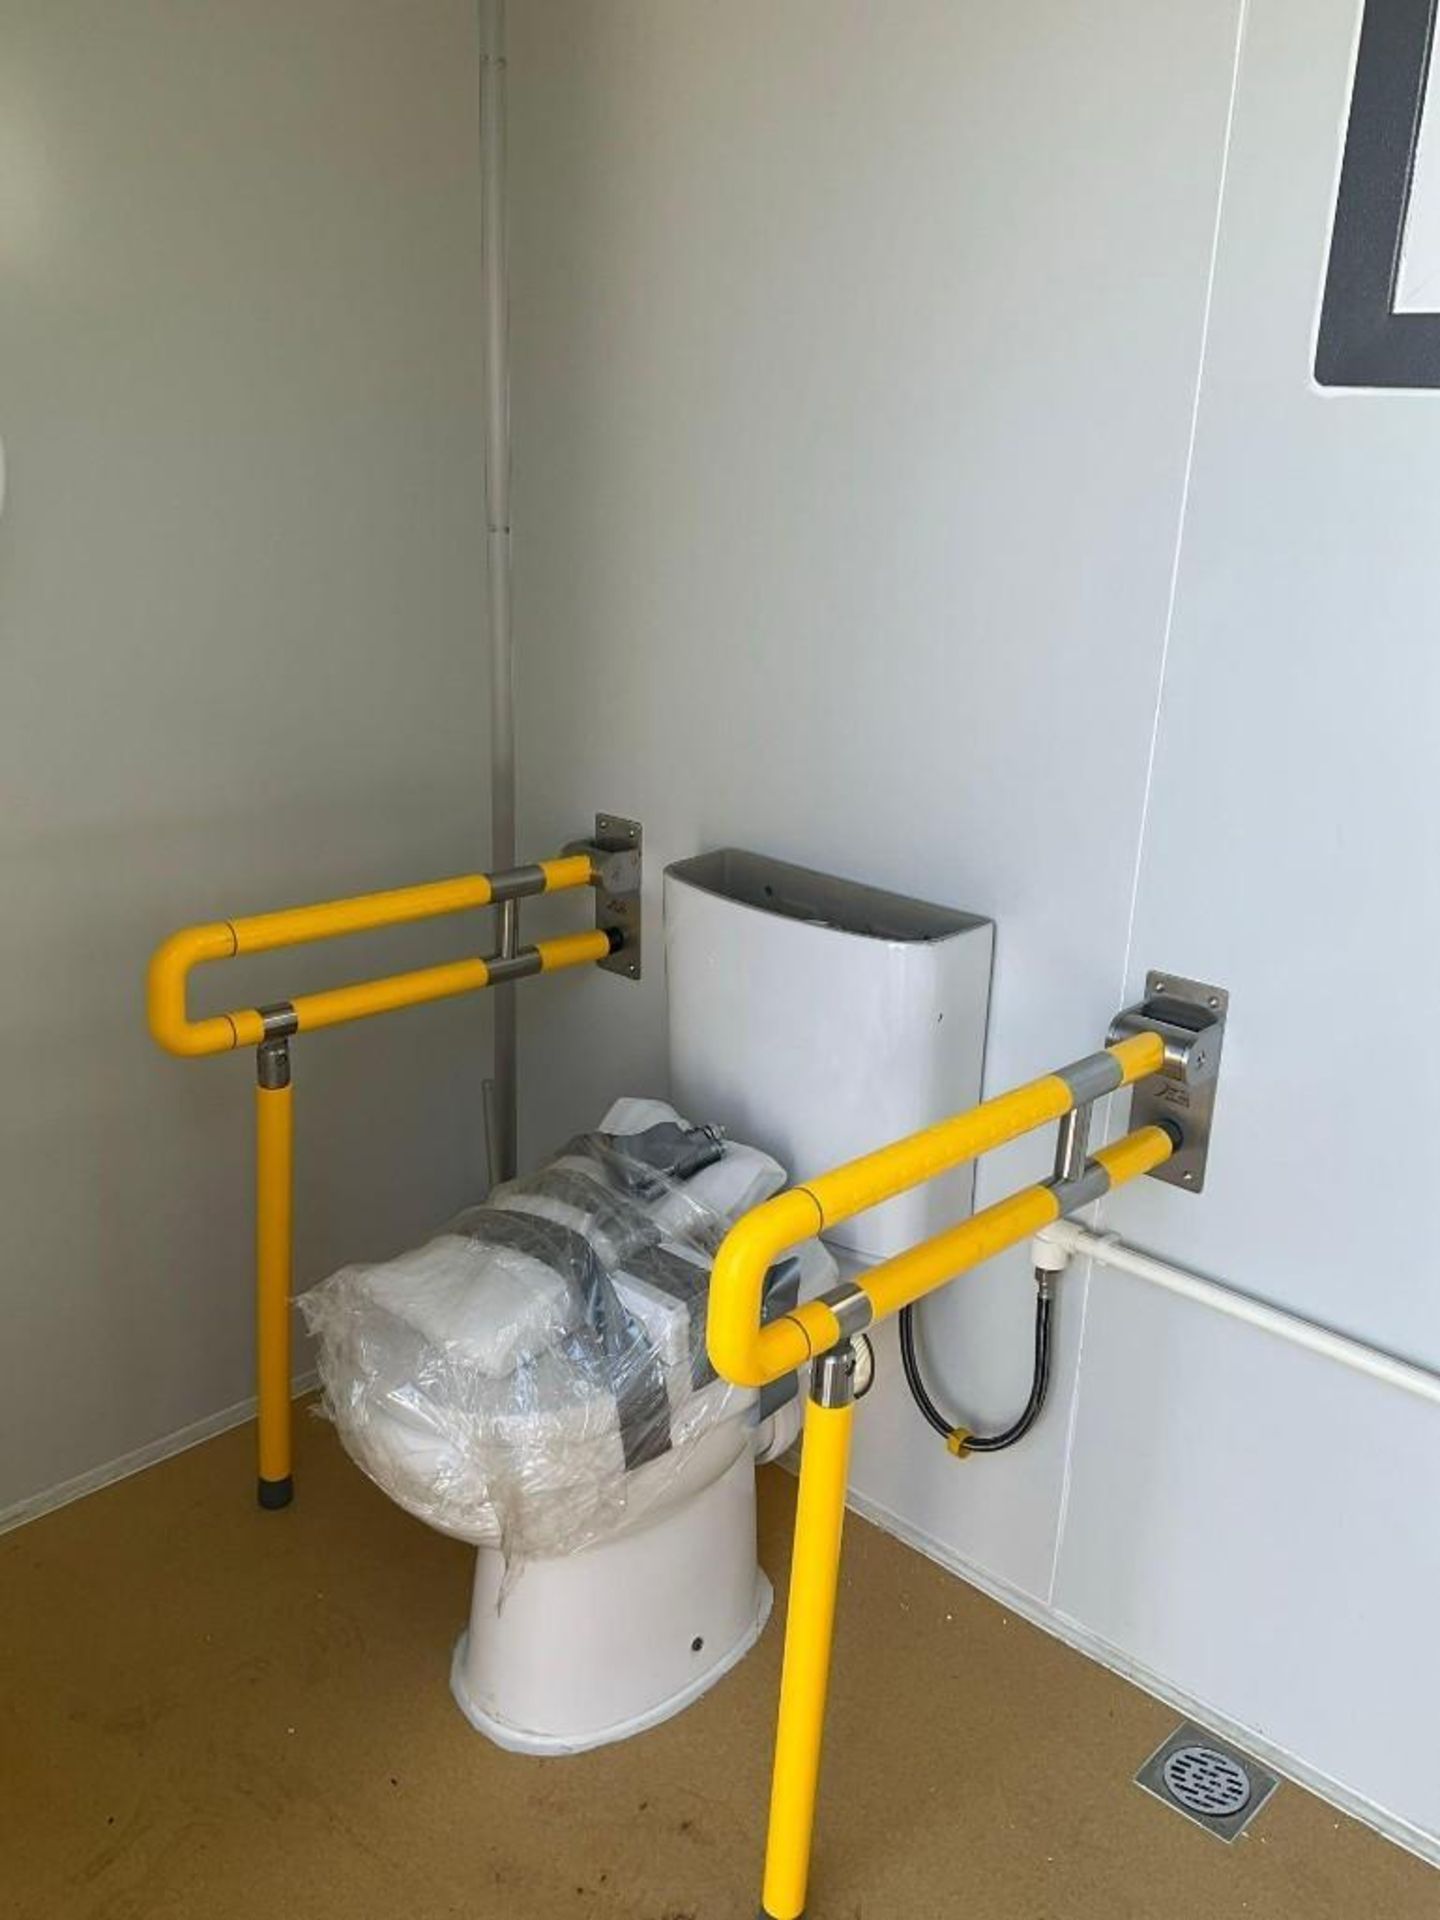 UNUSED PORTABLE BATHROOM UNIT WITH RAMP/HANDICAP ACCESSIBLE, ELECTRIC & PLUMBING HOOK UP WITH - Image 18 of 18